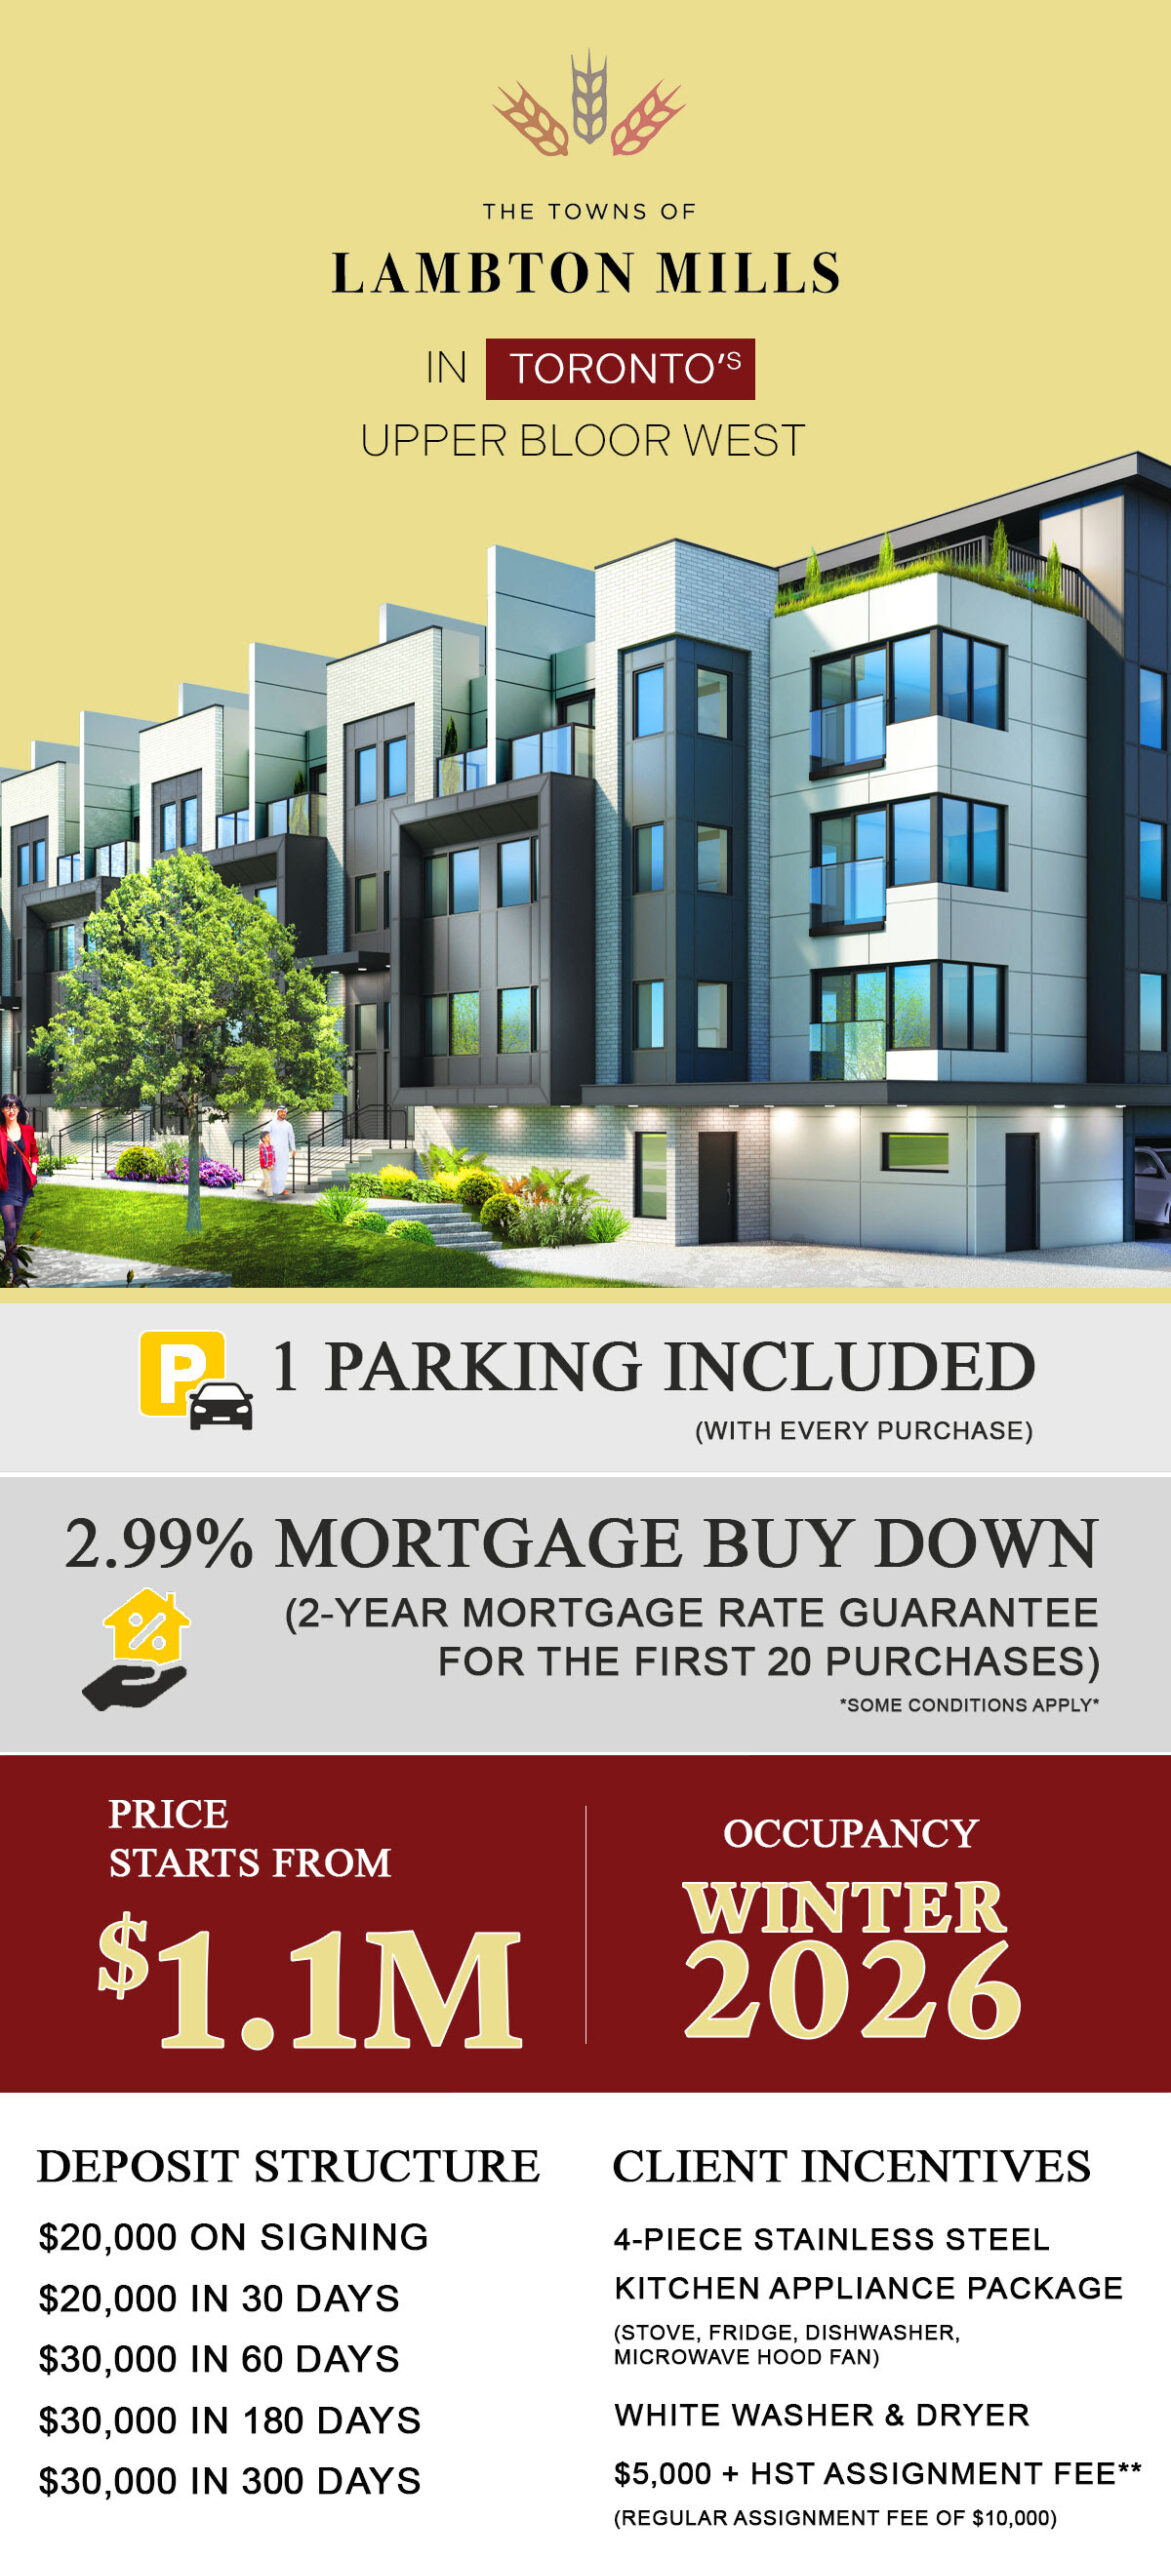 New Toronto townhomes sale, Lambton Mills, parking included.